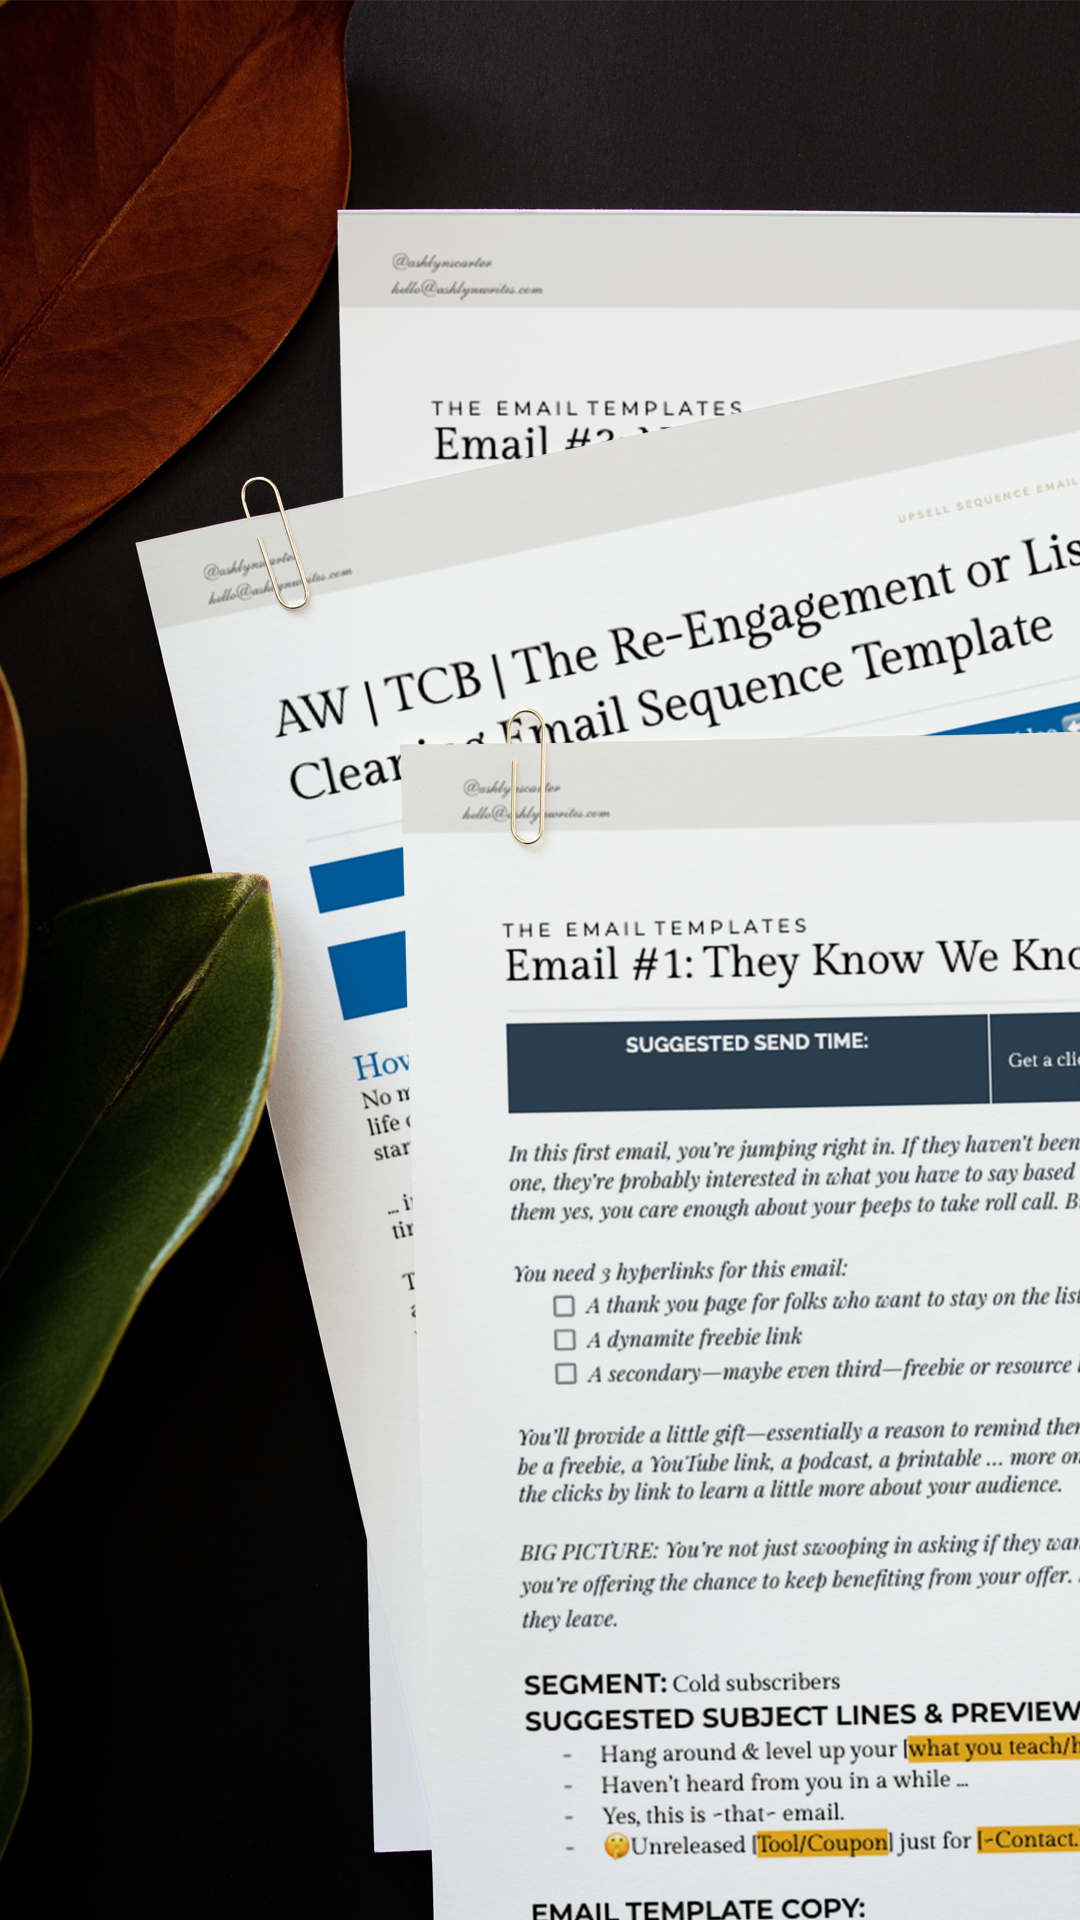 The Re-Engagement or List Cleaning Email Sequence Copy Template